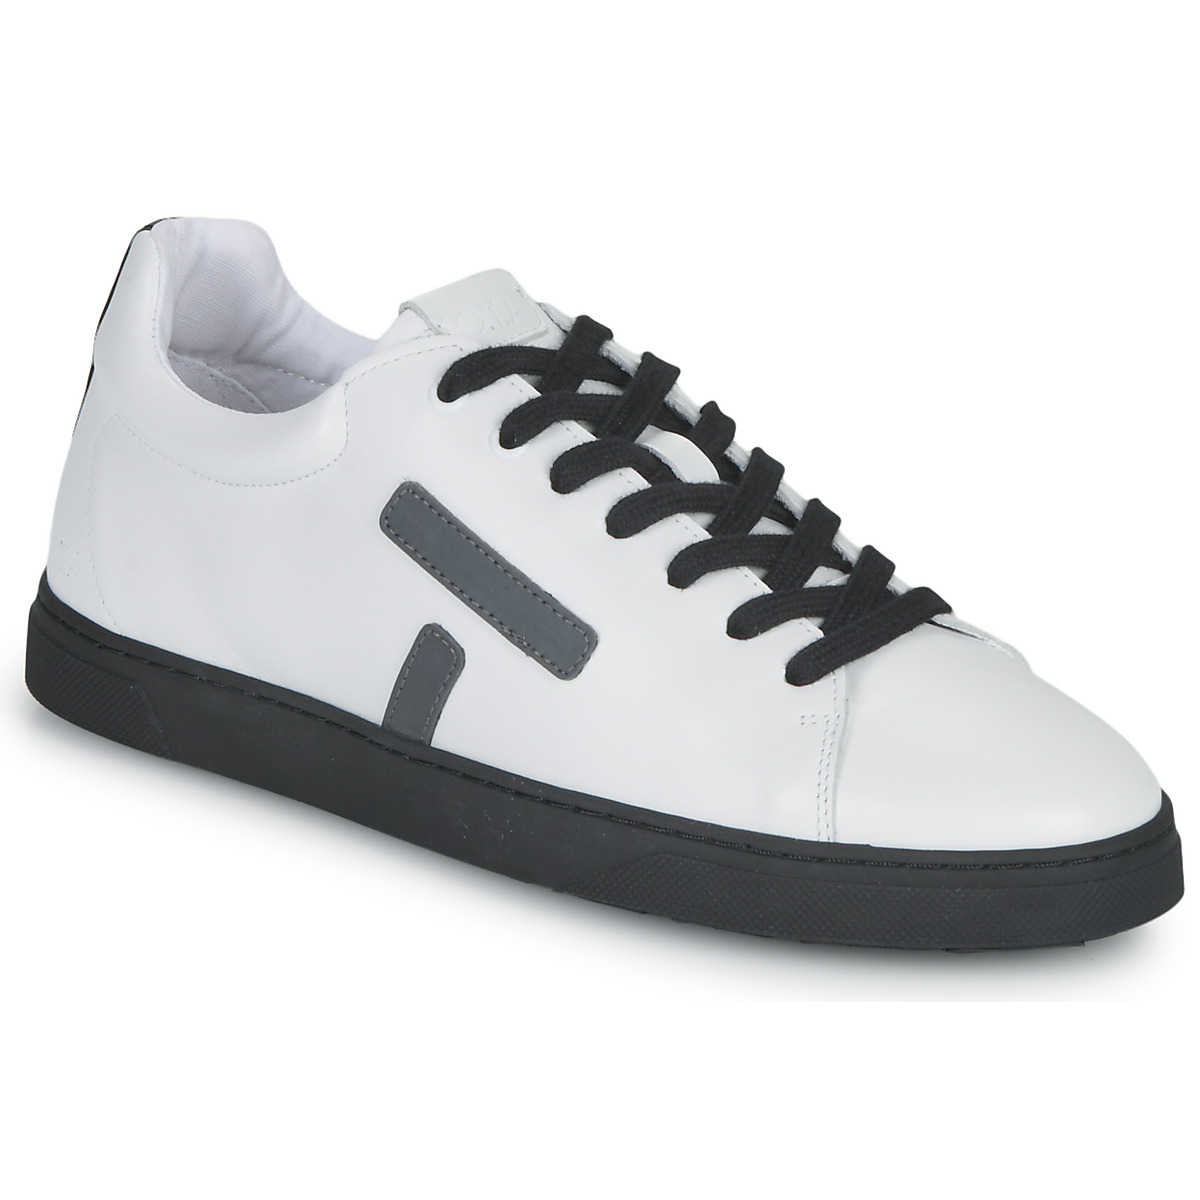 Chaussures Homme The Bagging Co KELWOOD Blanc / Noir